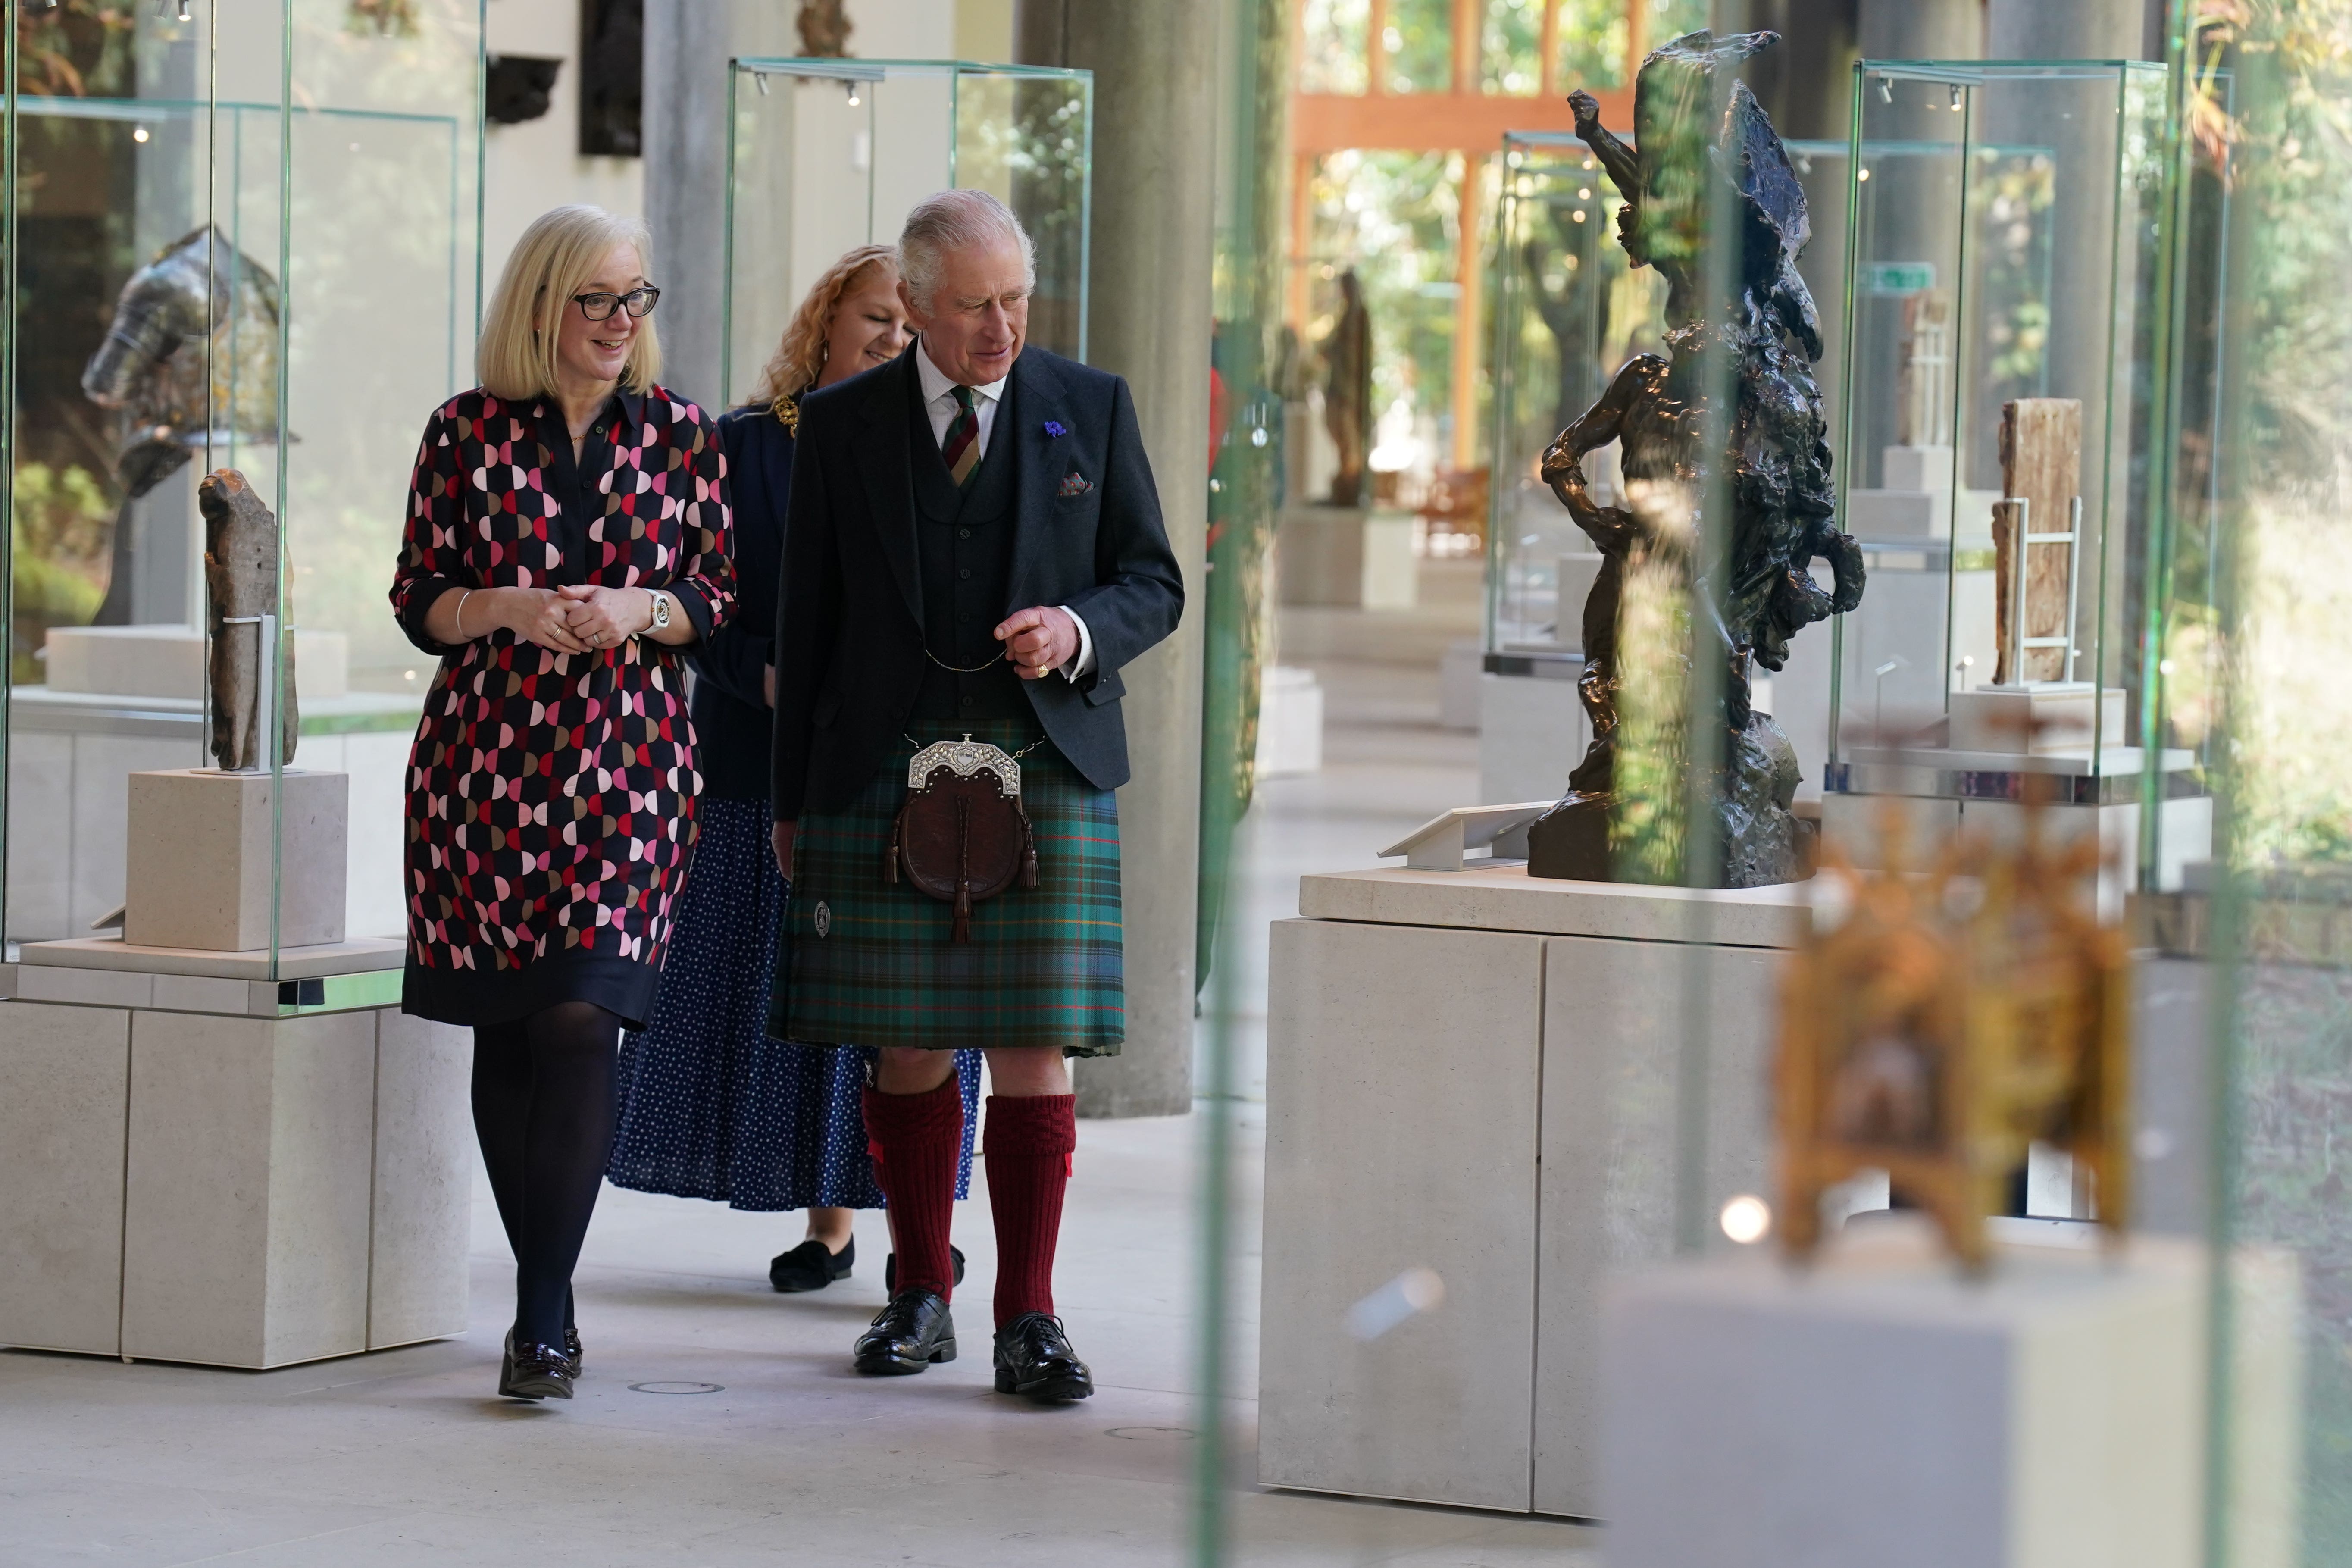 The King visited the Burrell Collection in Glasgow (Andrew Milligan/PA)